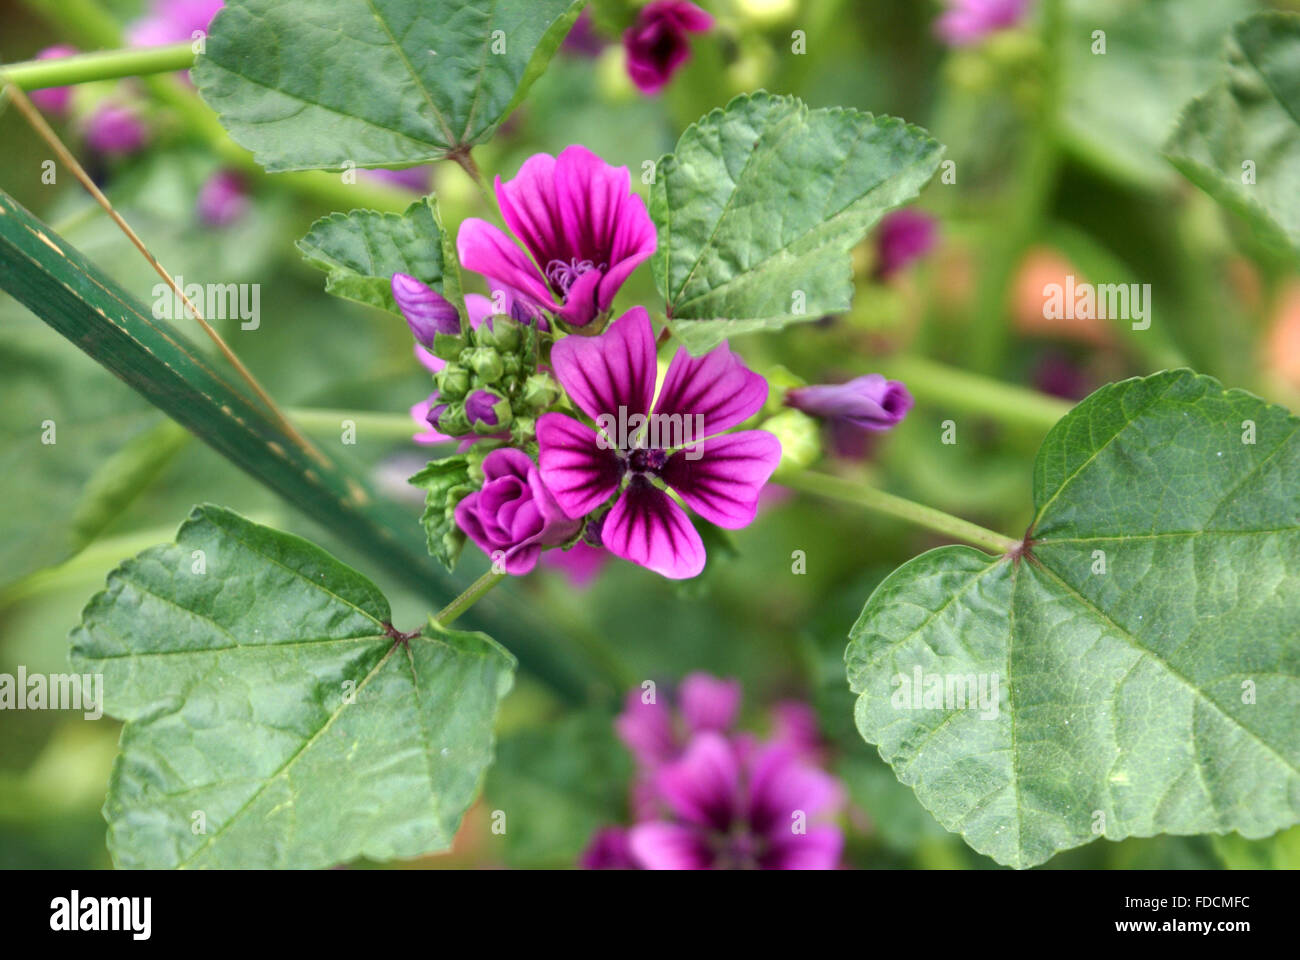 Malva sylvestris, Common mallow, tall mallow, spreading herb with palmately lobed leaves, purple flowers in clusters Stock Photo